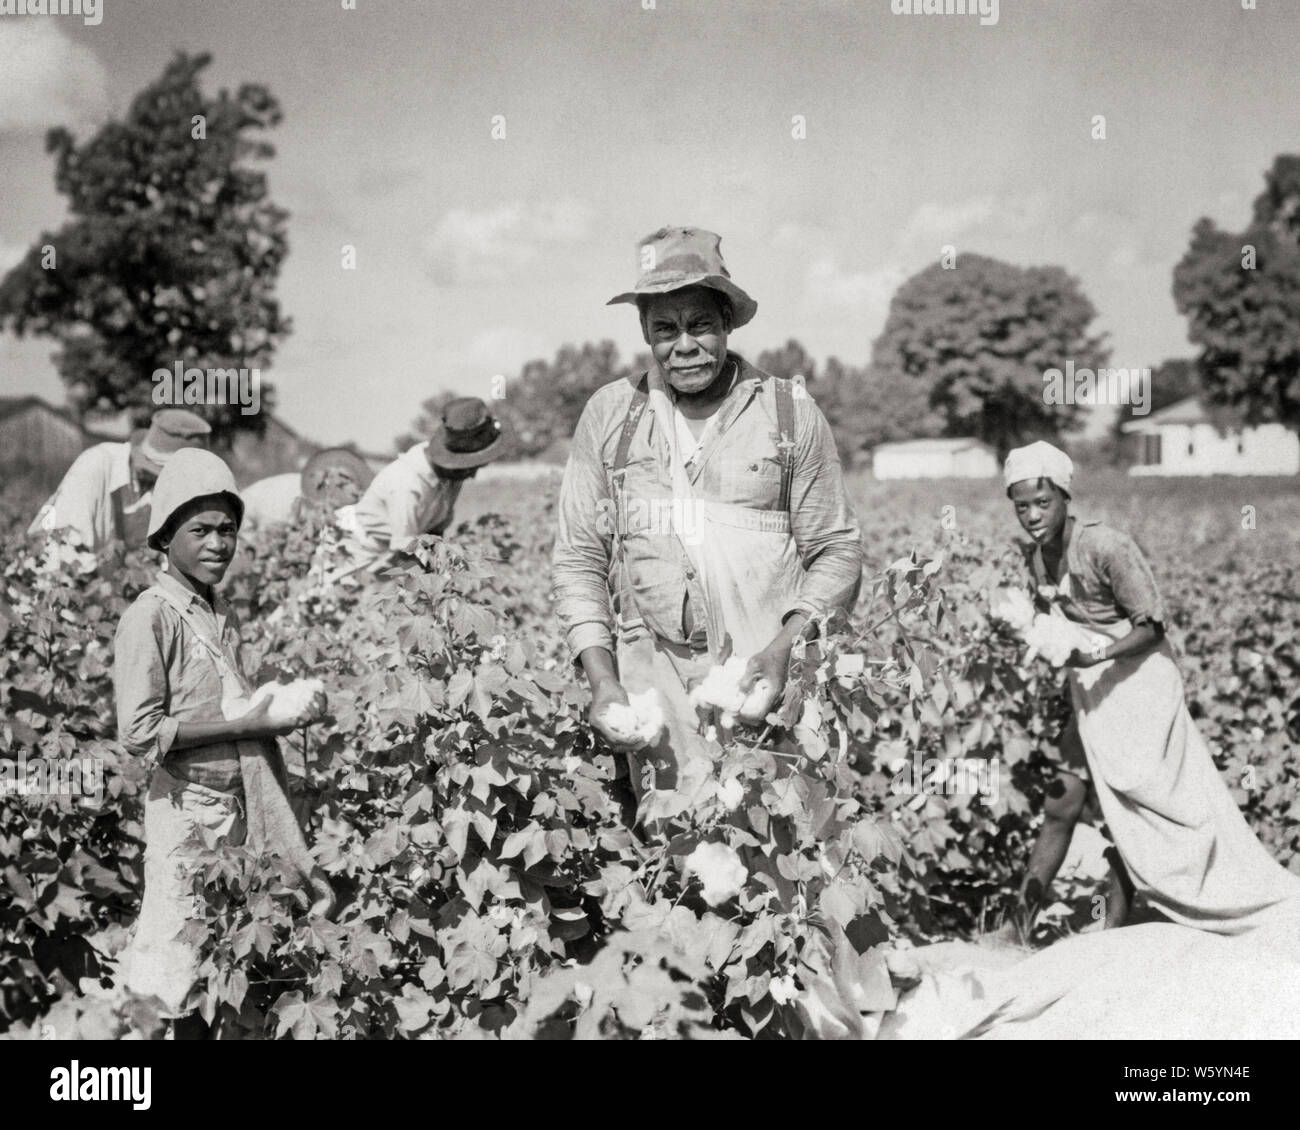 1930s AFRICAN AMERICAN FAMILY PICKING COTTON MEN AND WOMEN YOUNG AND OLD FIELD WORKERS LOOKING AT CAMERA LOUISIANA USA - c6352 HAR001 HARS 3 FACES HARD STRESS NOSTALGIC COMMUNITY DEPRESSION EXPRESSION OLD TIME BUSY NOSTALGIA INDUSTRY OLD FASHION 1 JUVENILE FACIAL TEAMWORK PICKING COTTON GRANDFATHER GRANDPARENTS TIRED FAMILIES LIFESTYLE FEMALES GRANDPARENT JOBS MOODY POOR RURAL 6 UNITED STATES COPY SPACE FULL-LENGTH LADIES PHYSICAL FITNESS PERSONS UNITED STATES OF AMERICA MALES RISK TEENAGE GIRL SIX SENIOR MAN SENIOR ADULT EXPRESSIONS TROUBLED AGRICULTURE B&W SADNESS NORTH AMERICA EYE CONTACT Stock Photo